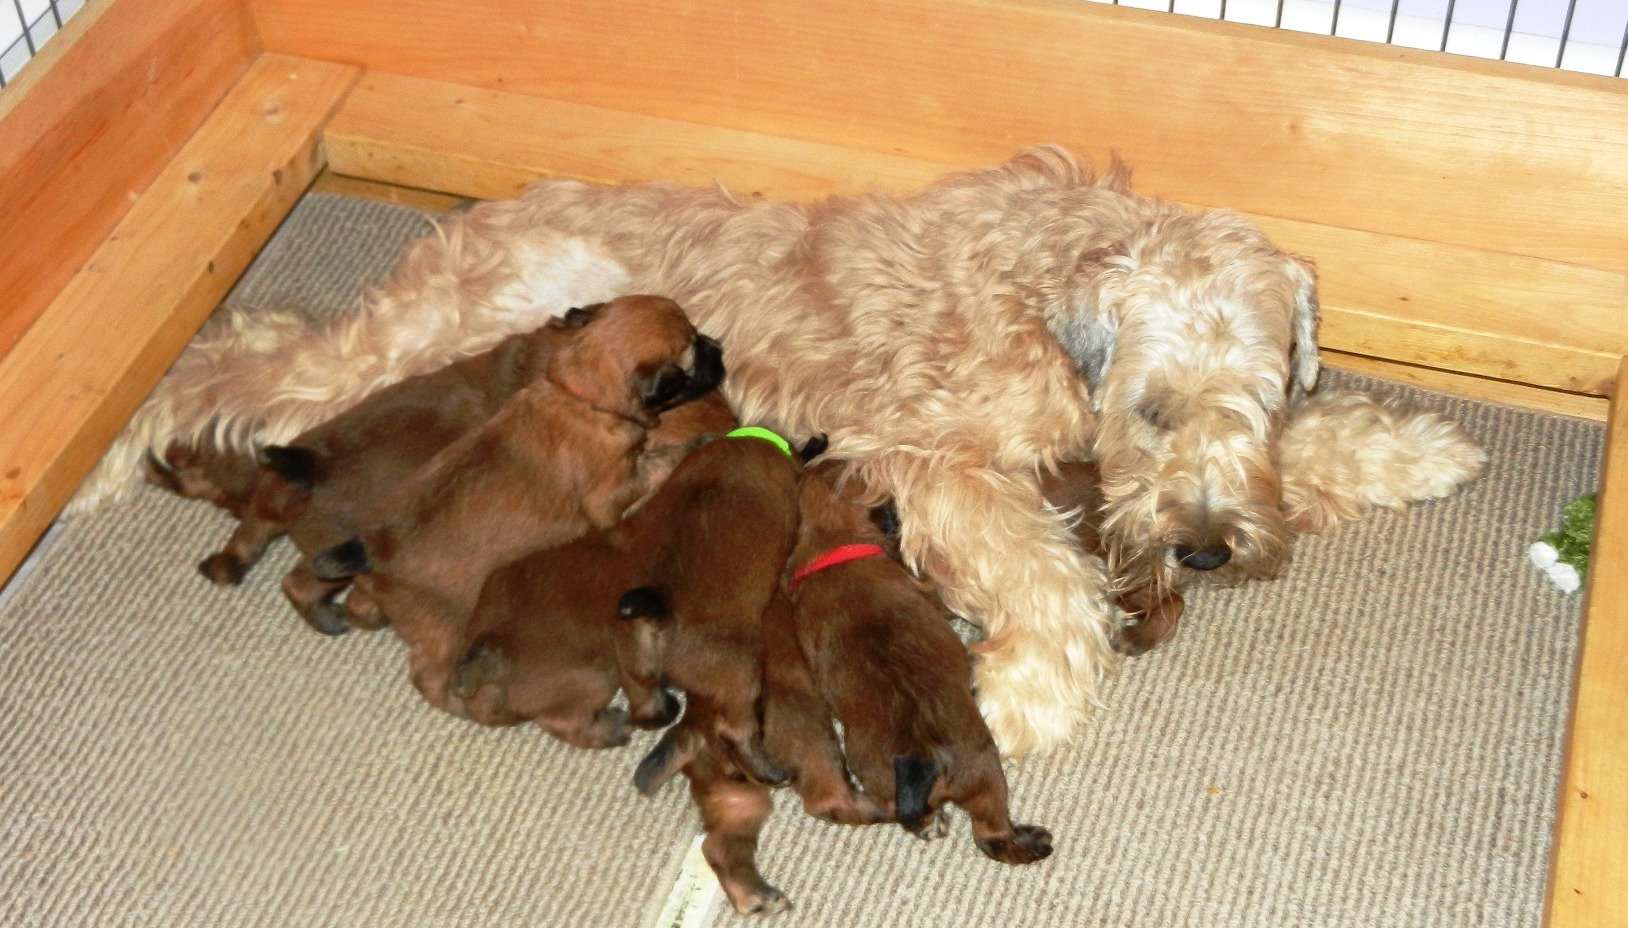 At age 3 1/2 weeks, it's getting crowded at the milk bar!